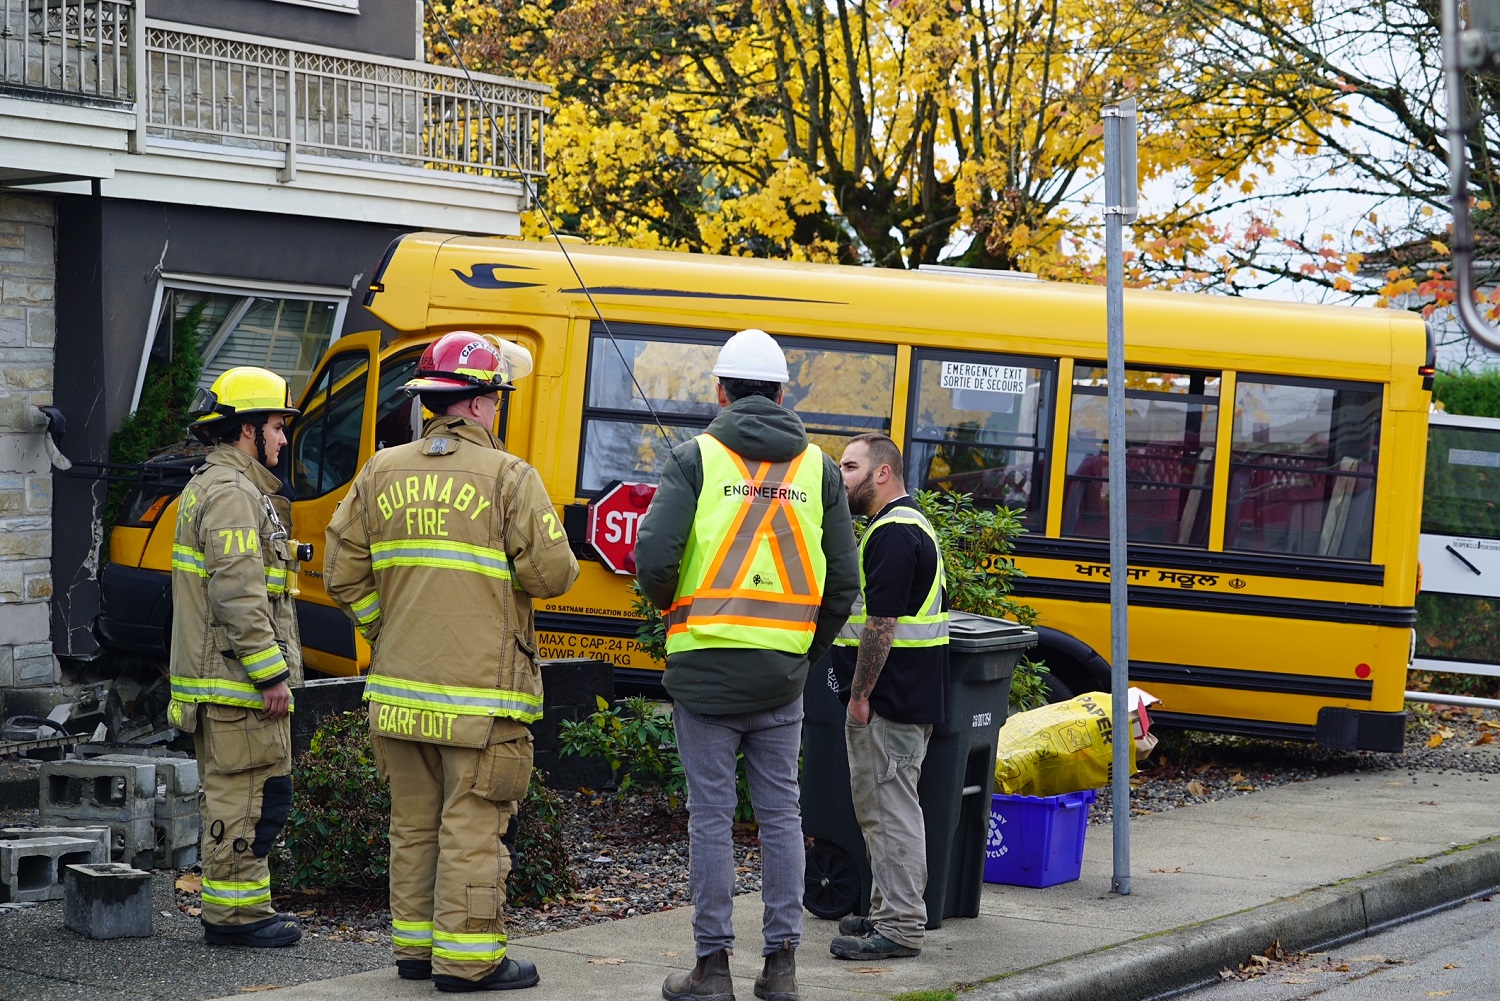 11 people taken to hospital after school bus crashes into home in Burnaby,  B.C., first responders say